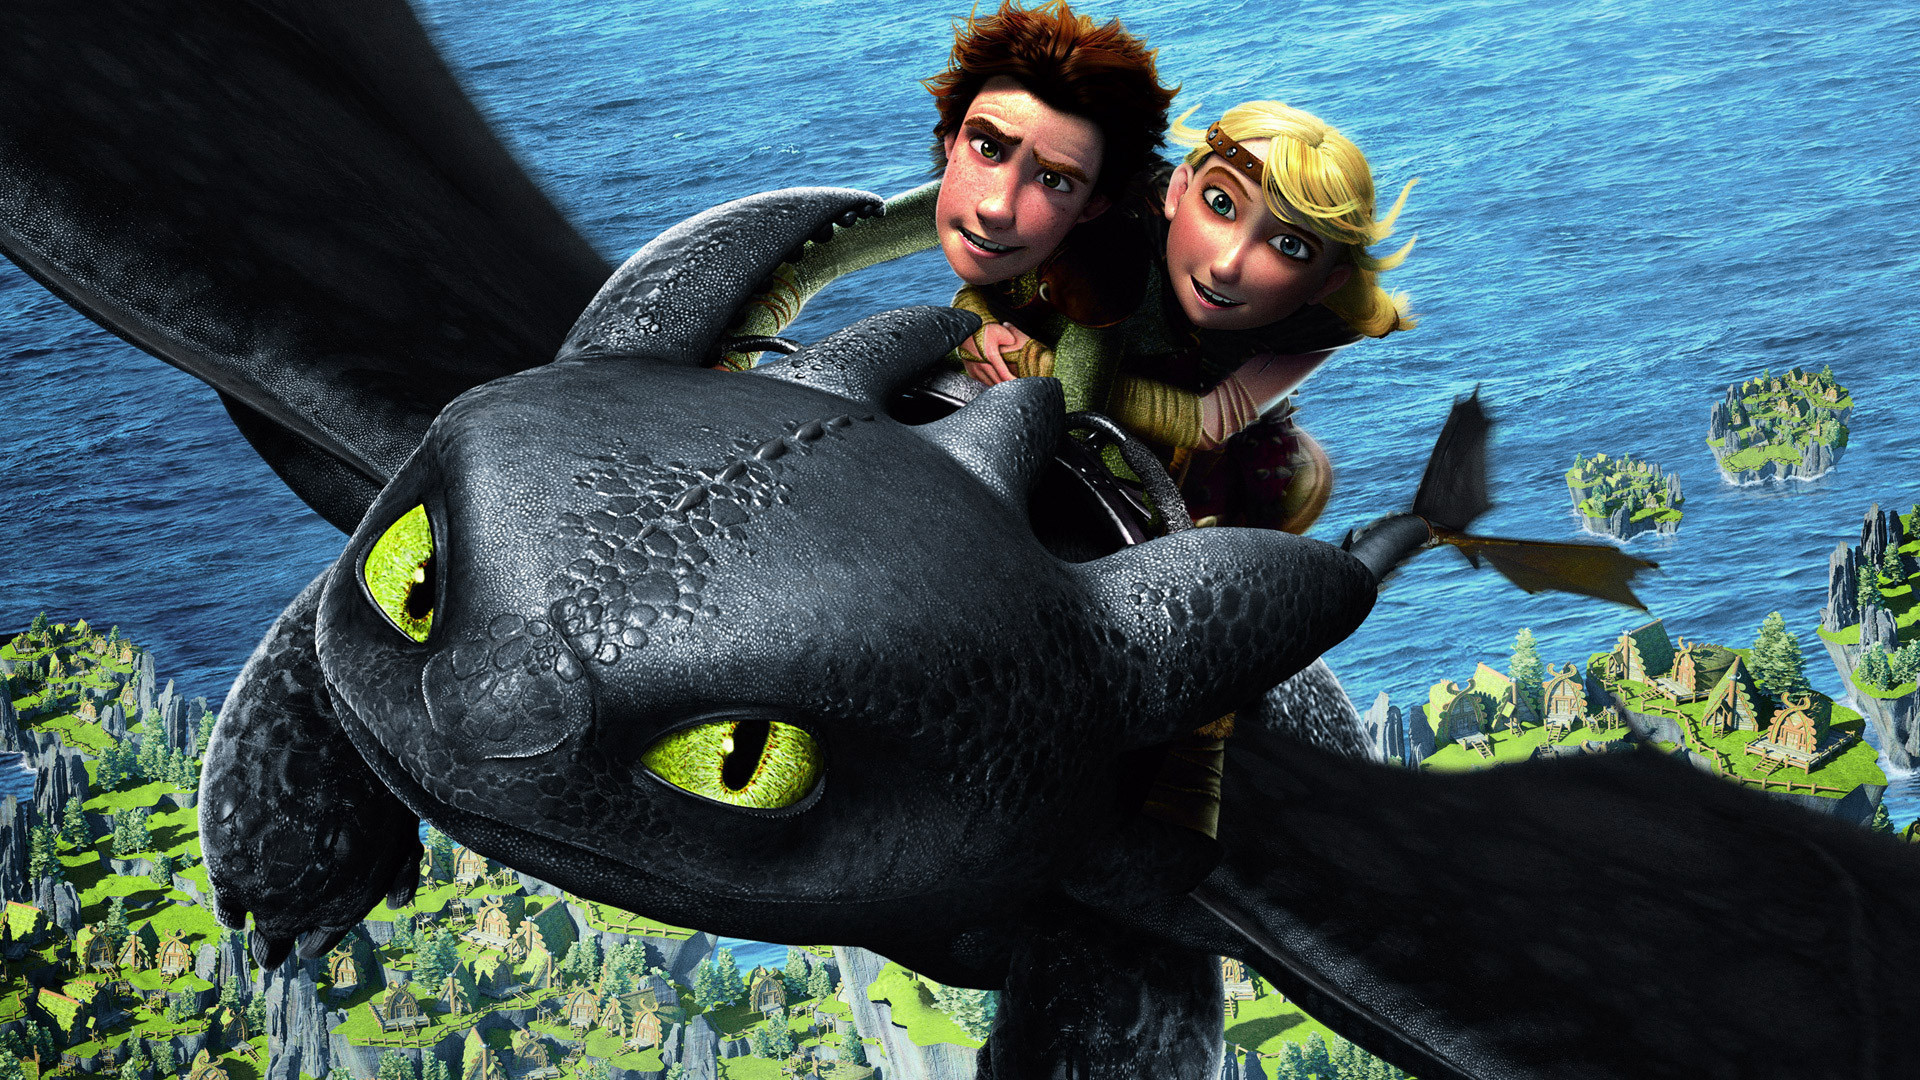 Toothless How To Train Your Dragon Astrid How To Train Your Dragon Hiccup How To Train Your Dragon 1920x1080